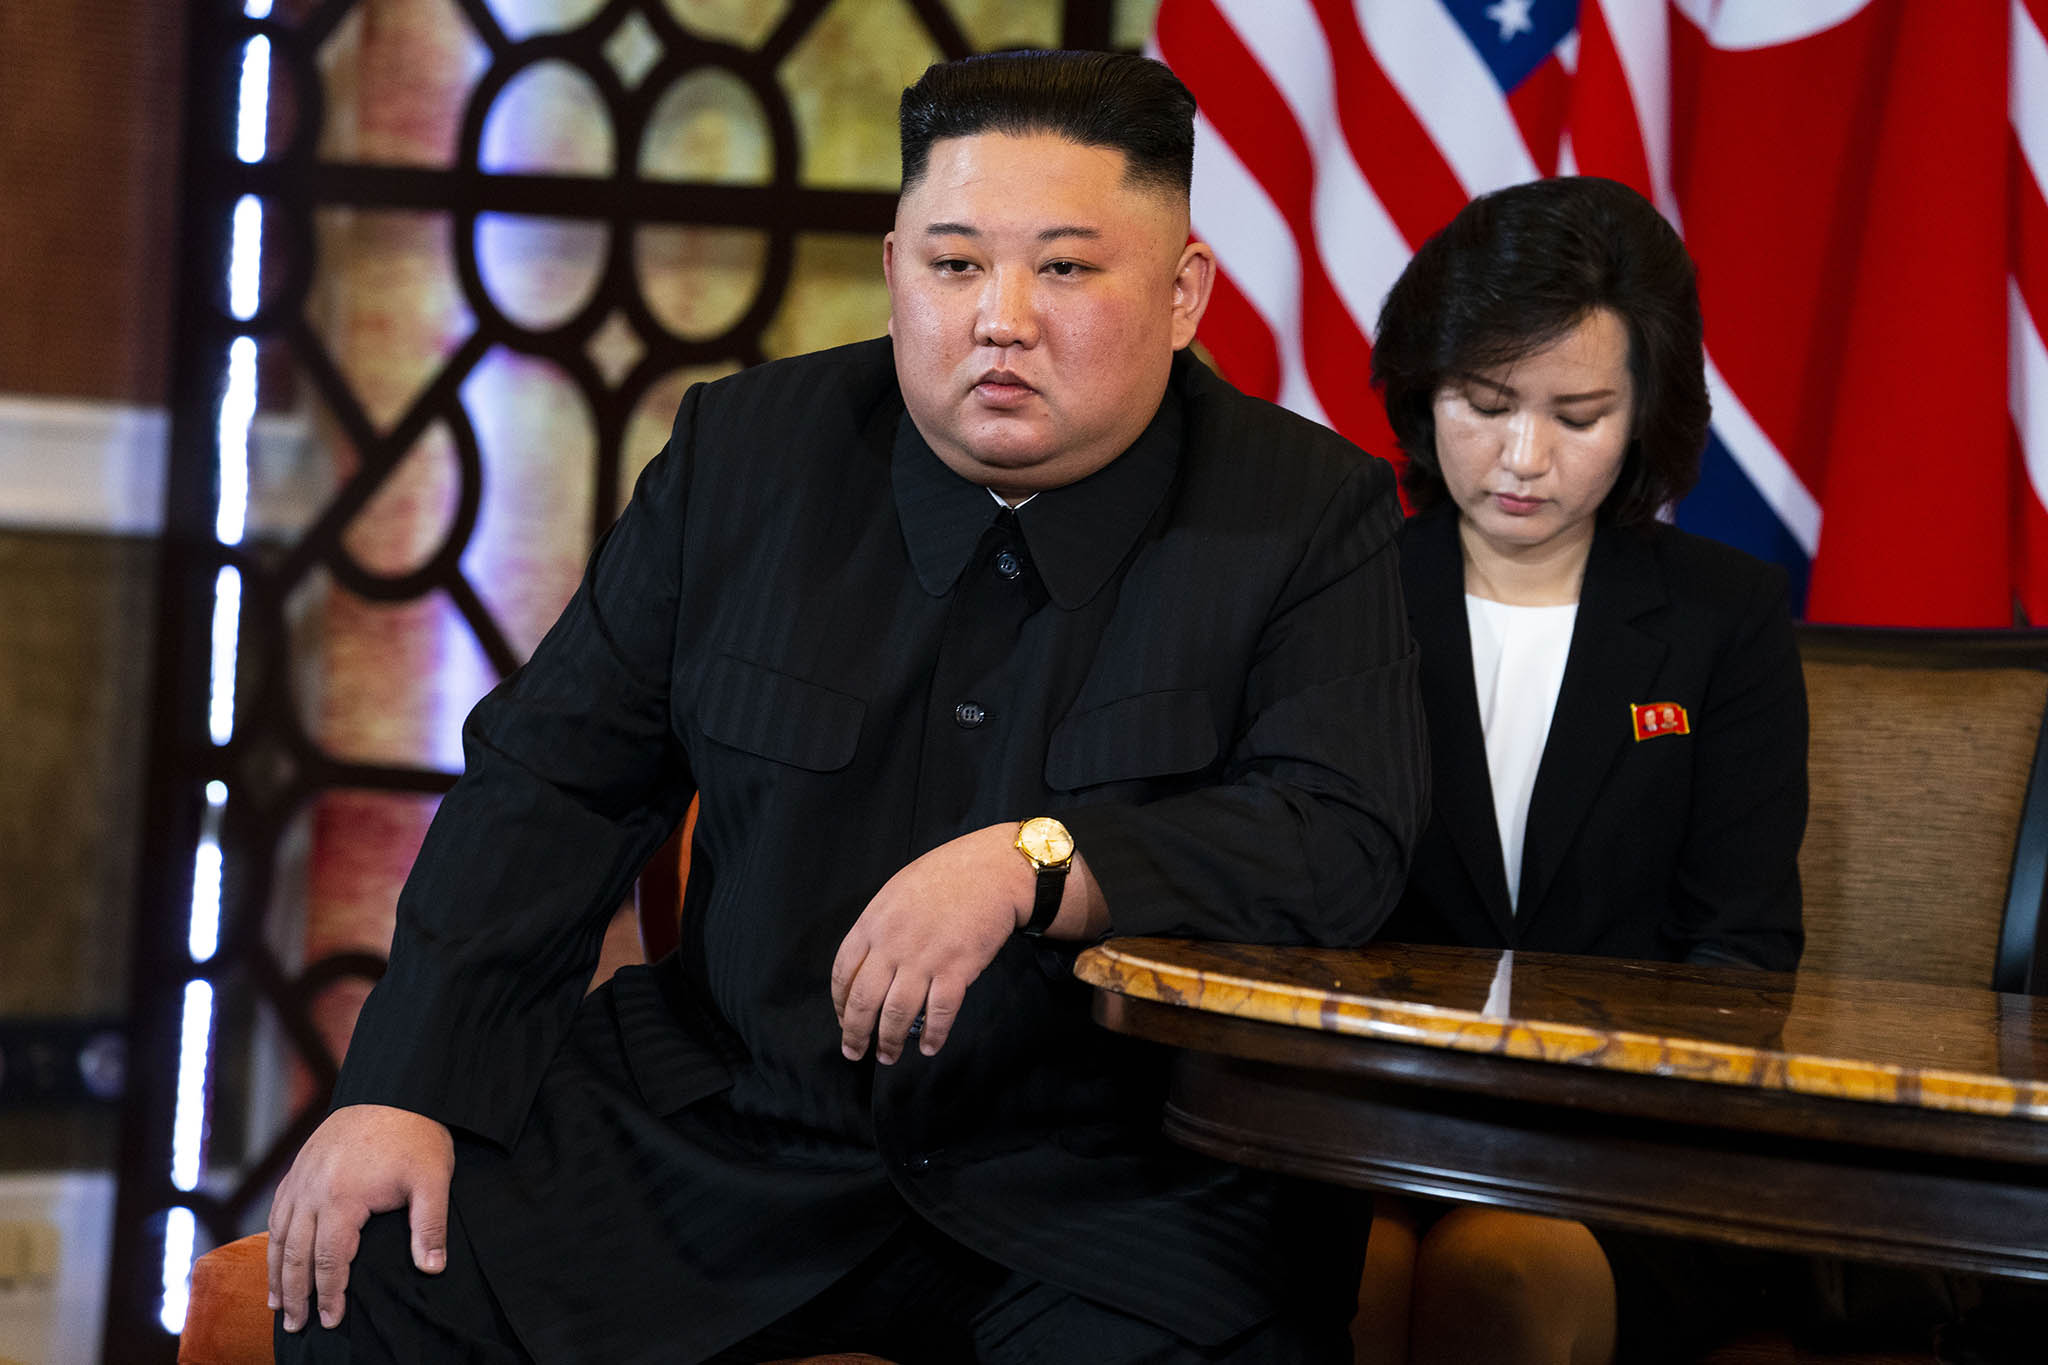 North Korean leader Kim Jong Un has described the effort to address the problem of deforestation in his country as “a war to improve nature.” (Doug Mills/The New York Times)